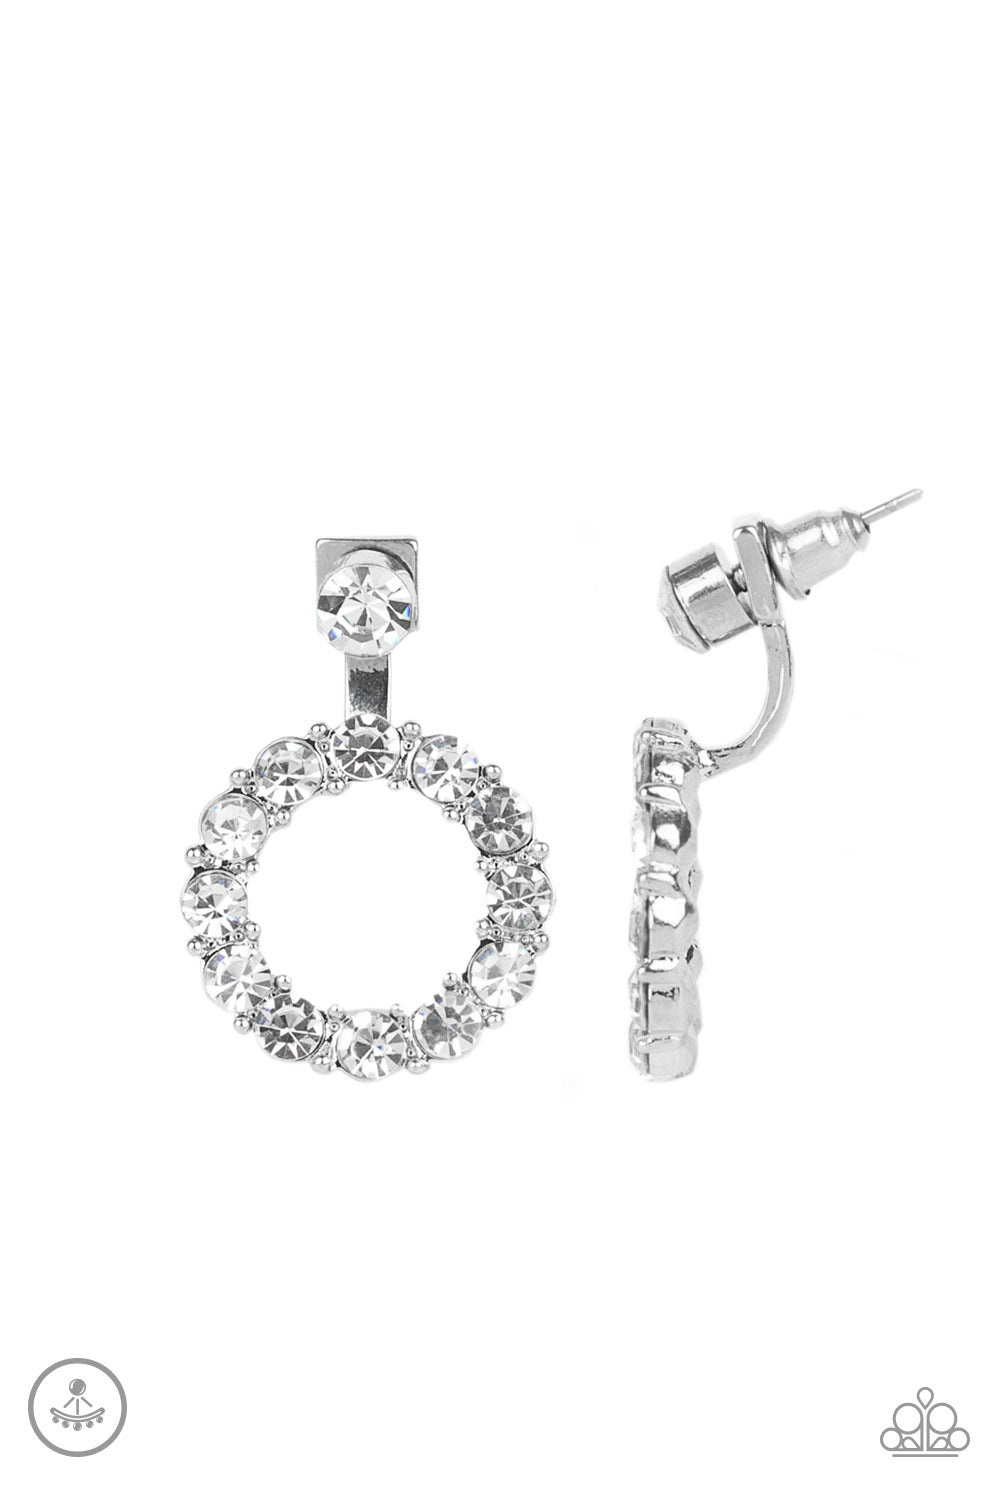 Diamond Halo - White and Silver Rhinestone Earrings - Paparazzi Accessories - 
A solitaire white rhinestone attaches to a double-sided post, designed to fasten behind the ear. Encrusted in a ring of glassy white rhinestones, the glittery hoop peeks out beneath the ear for a glamorous look. Earring attaches to a standard post fitting.
Sold as one pair of double-sided post earrings.
